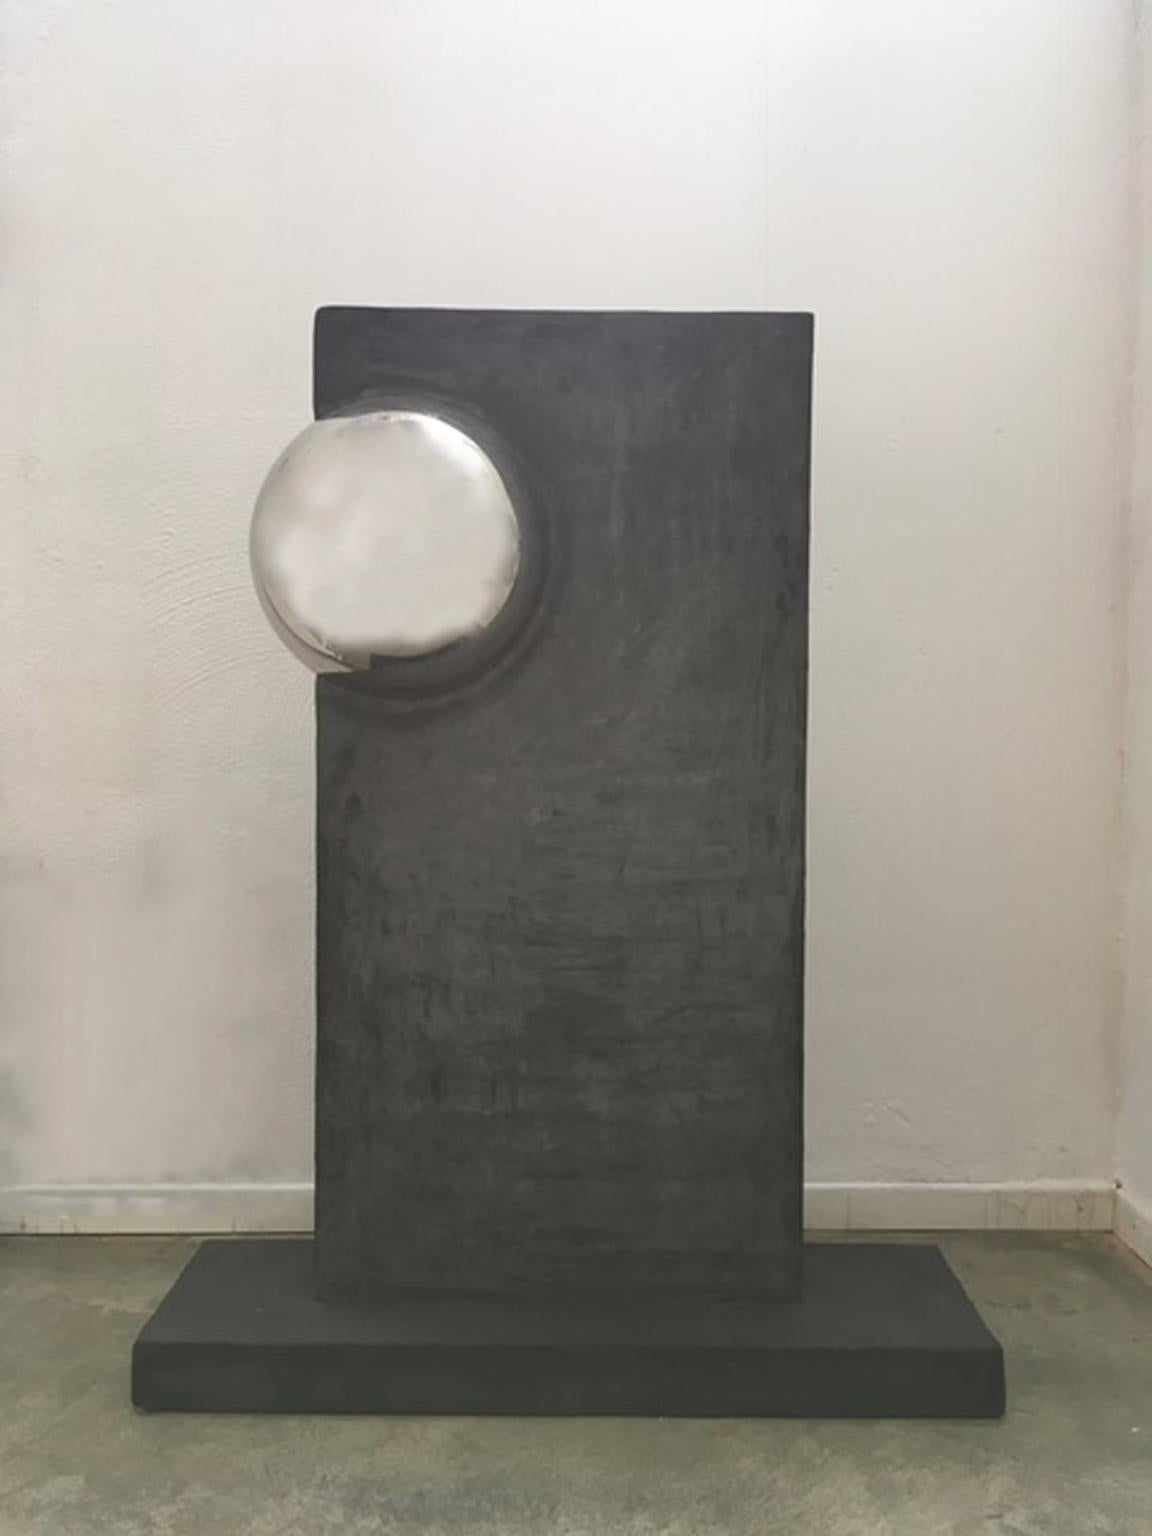 Antonio De Martino Abstract Sculpture - Stele with sphere Italy 2000 Polyester Grey Colored Mortar with Chrome Sphere